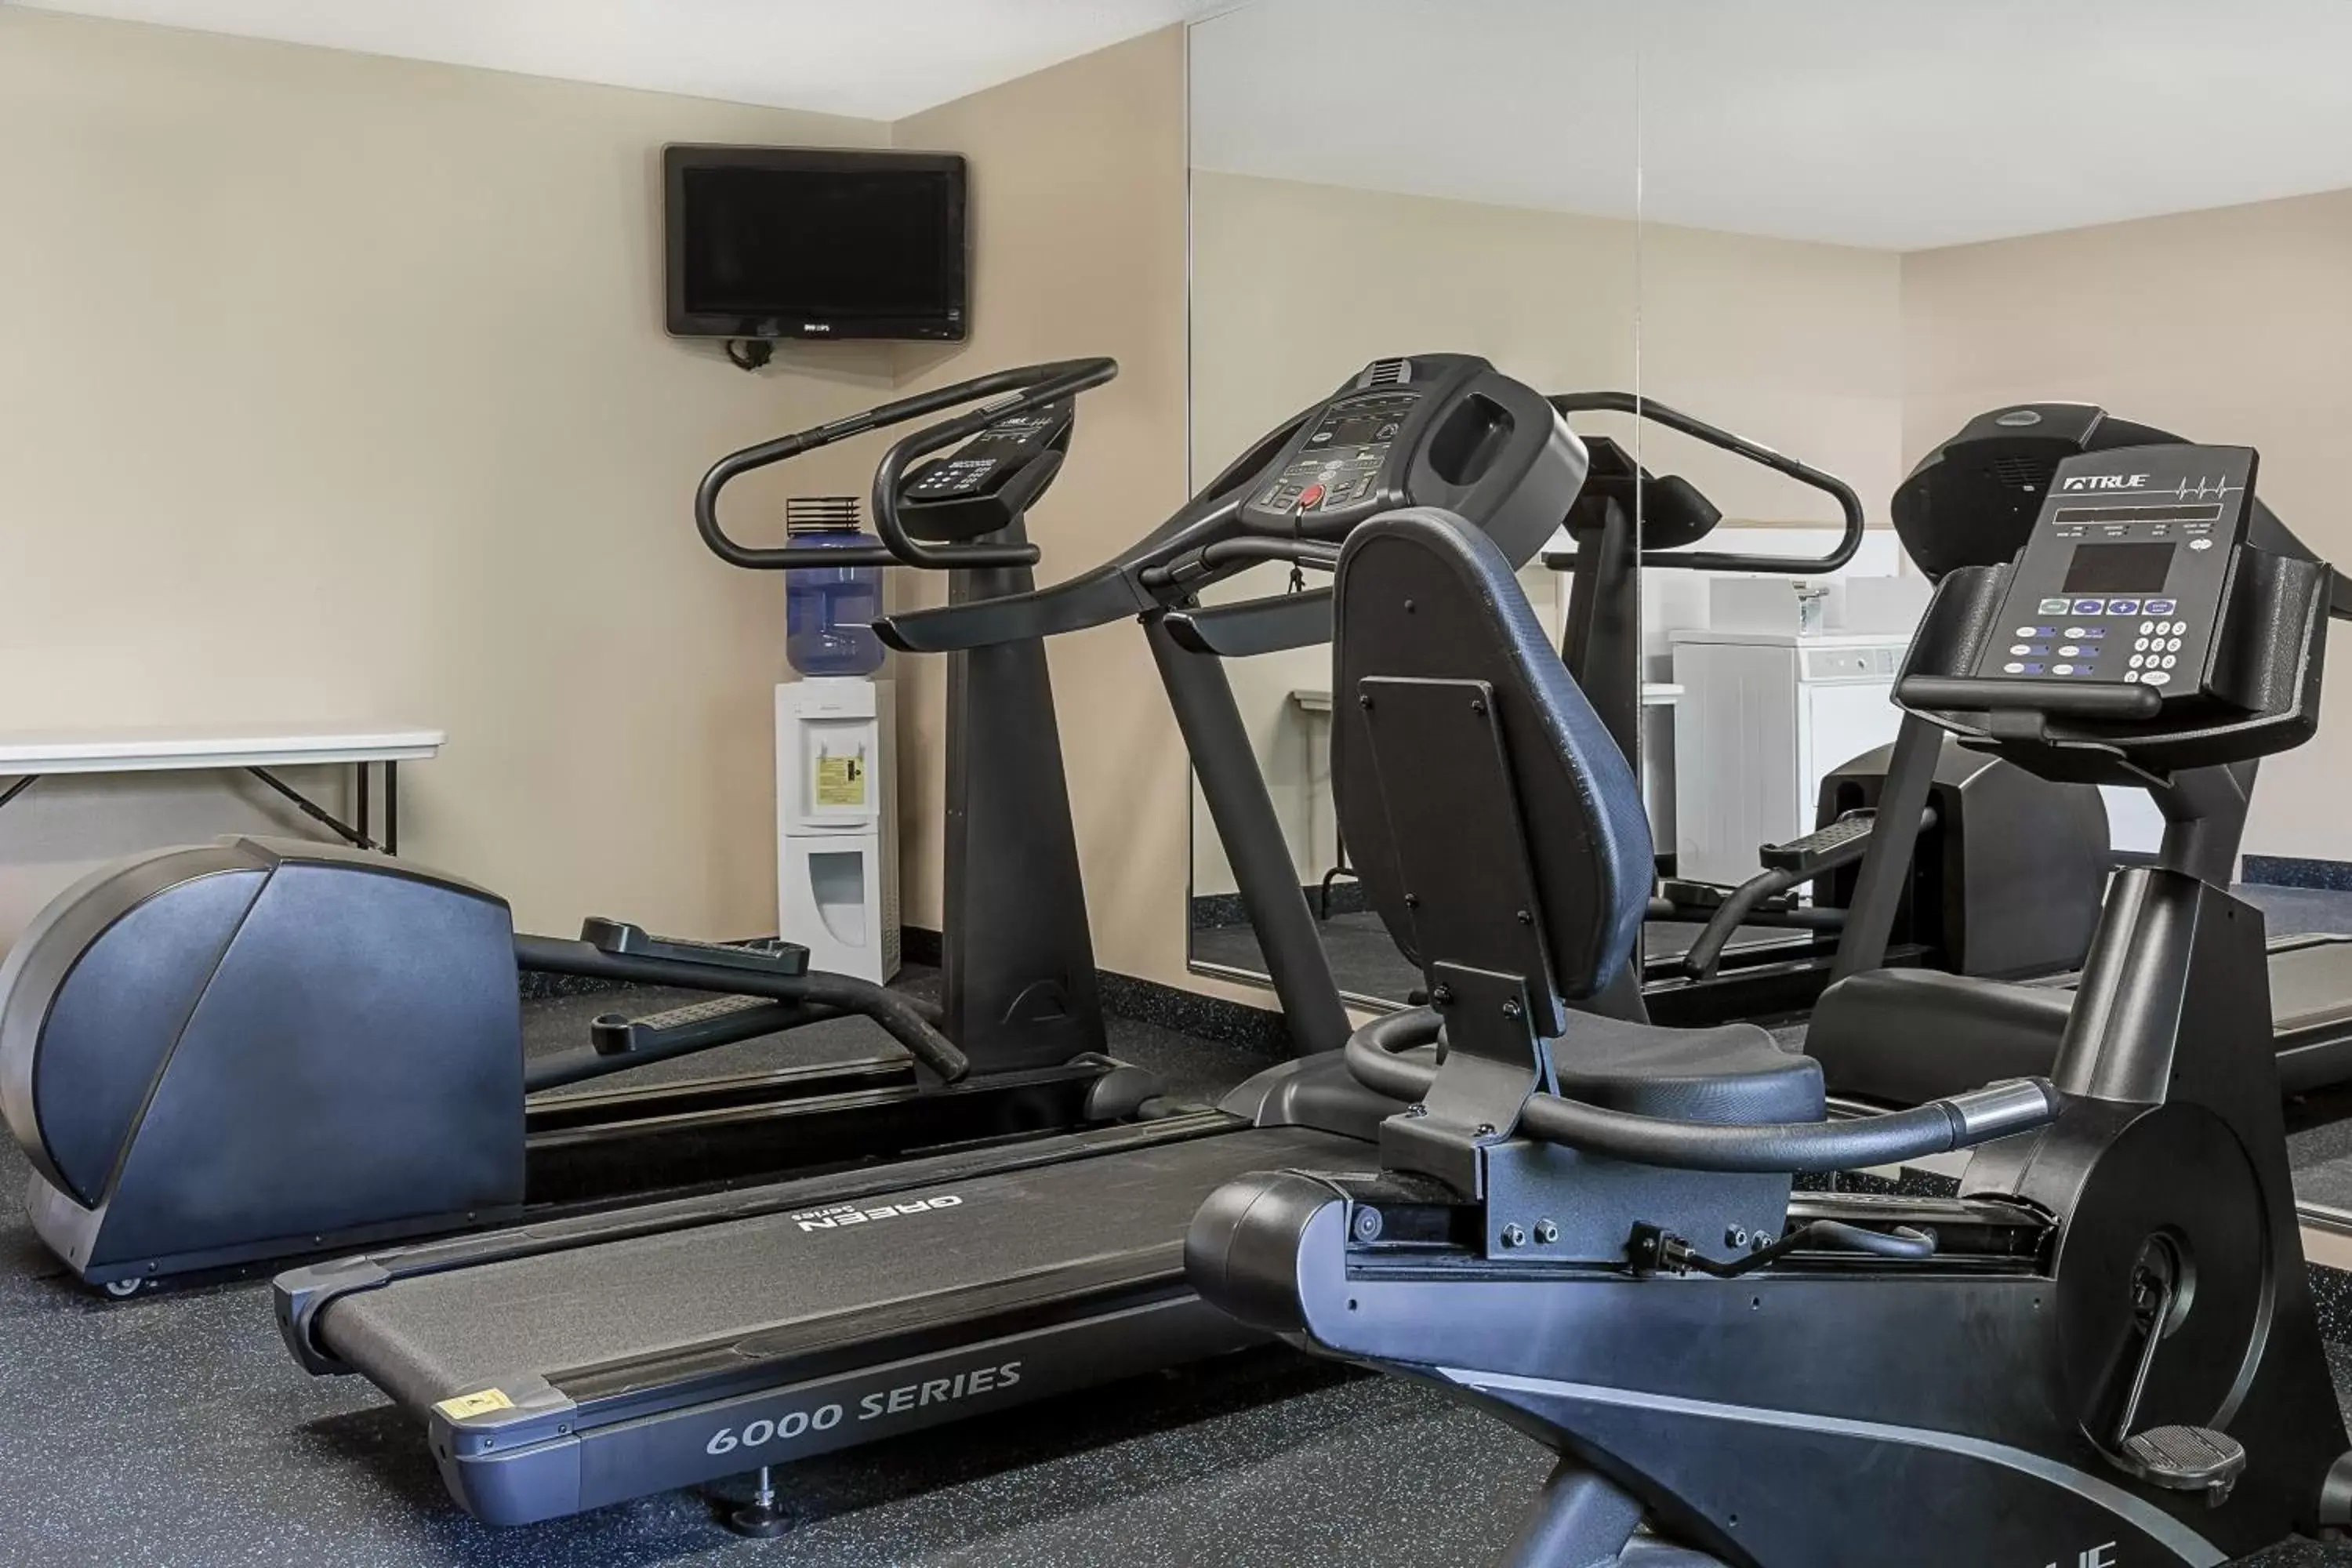 Fitness centre/facilities, Fitness Center/Facilities in Days Inn by Wyndham Hoover Birmingham